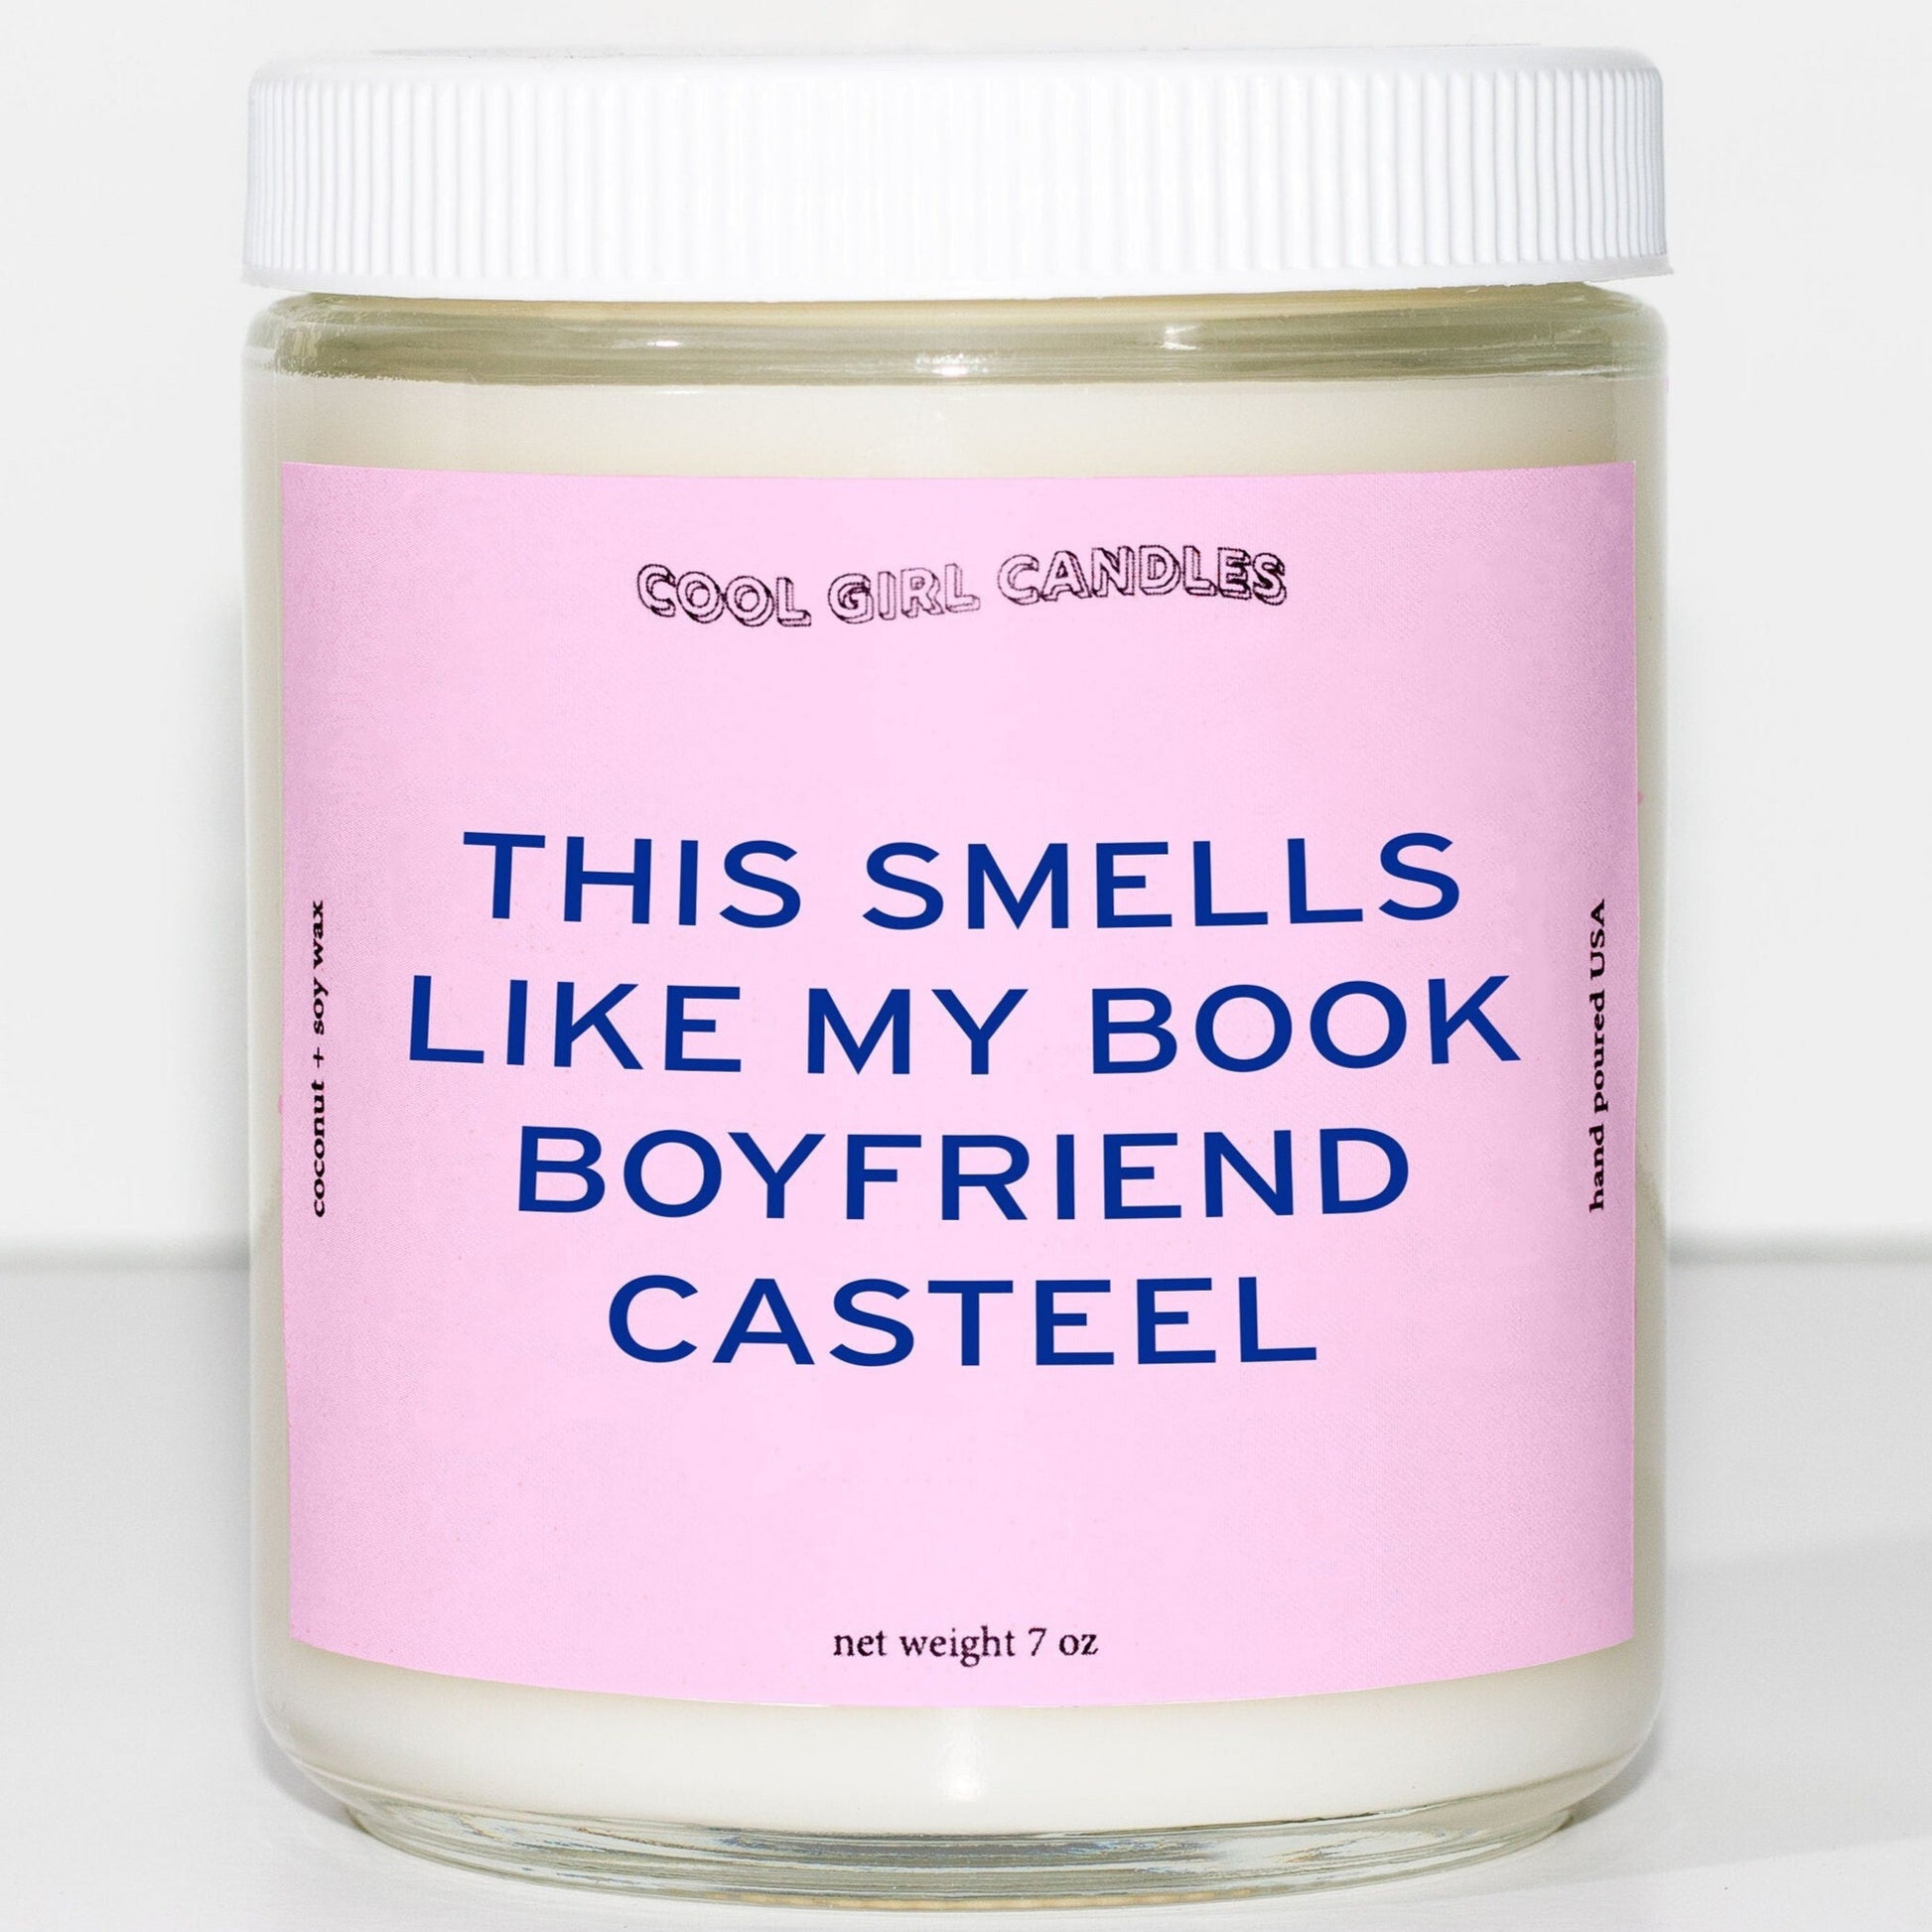 Cool Girl Candles This Smells like my book boyfriend Casteel FROM BLOOD AND ASH fandom gifts